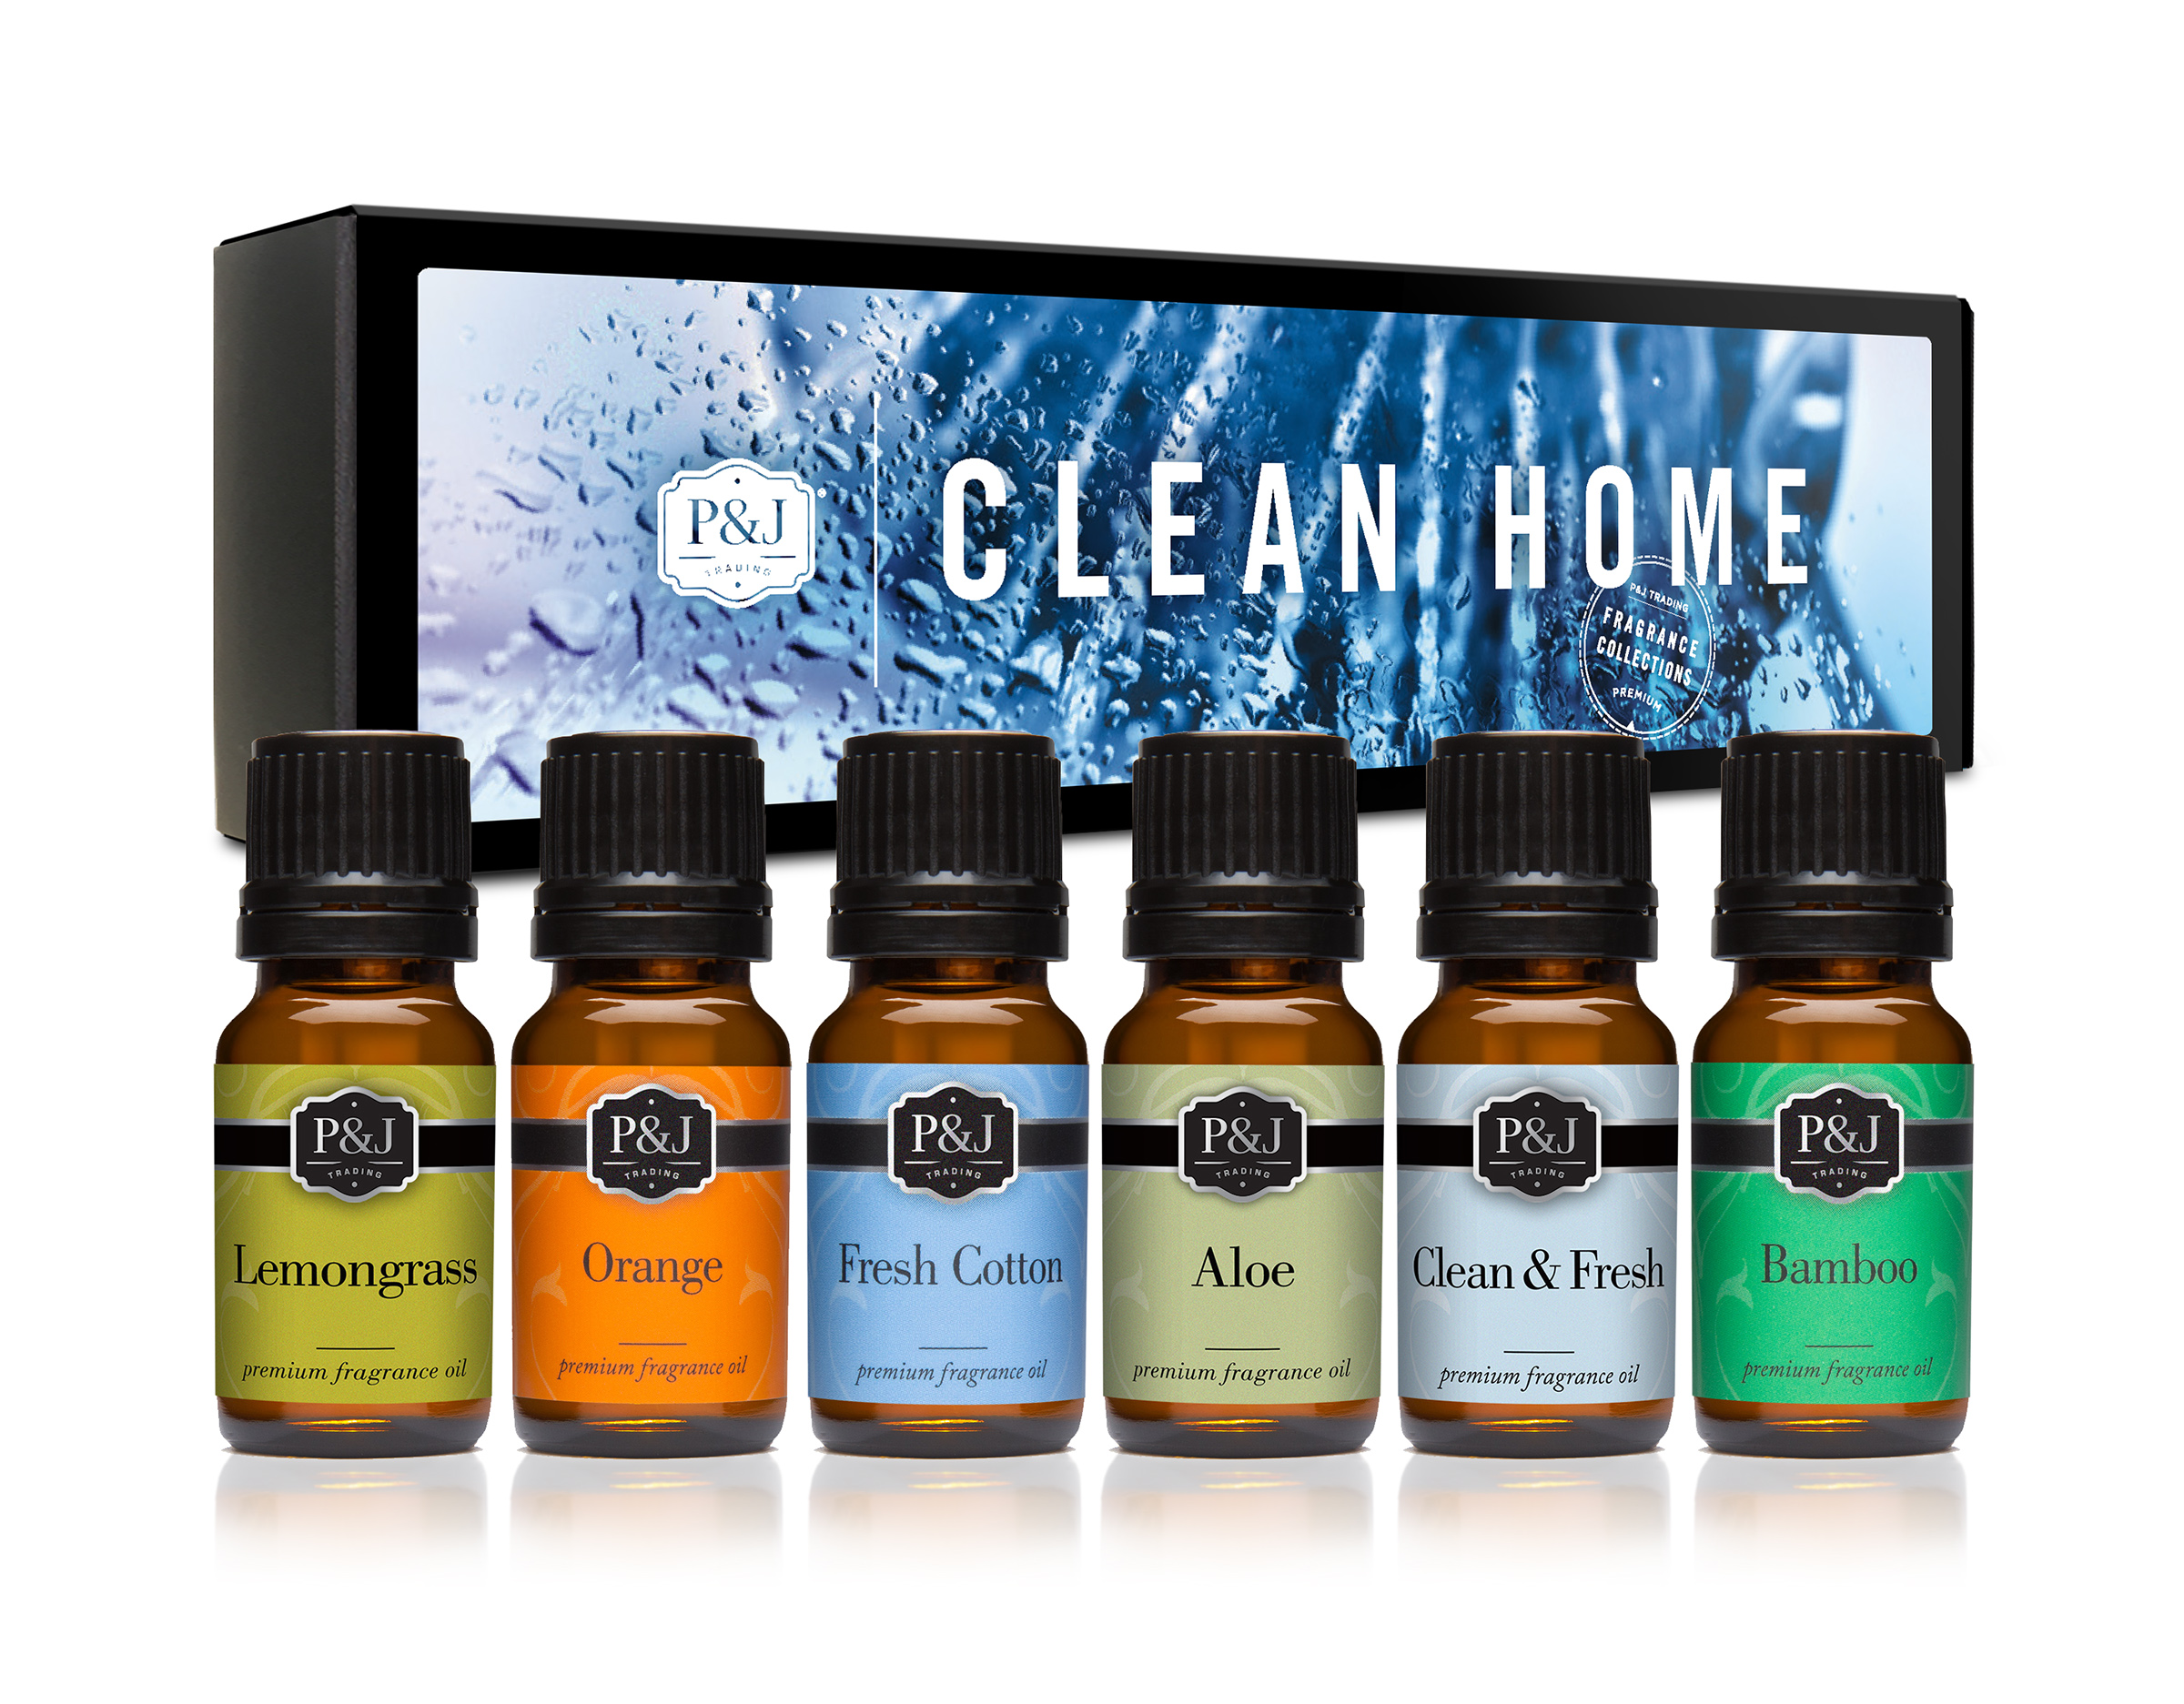 P&j Trading Fragrance Oil | Clean Home Set of 6 - Scented Oil for Soap Making, Diffusers, Candle Making, Lotions, Haircare, Slime, and Home Fragrance